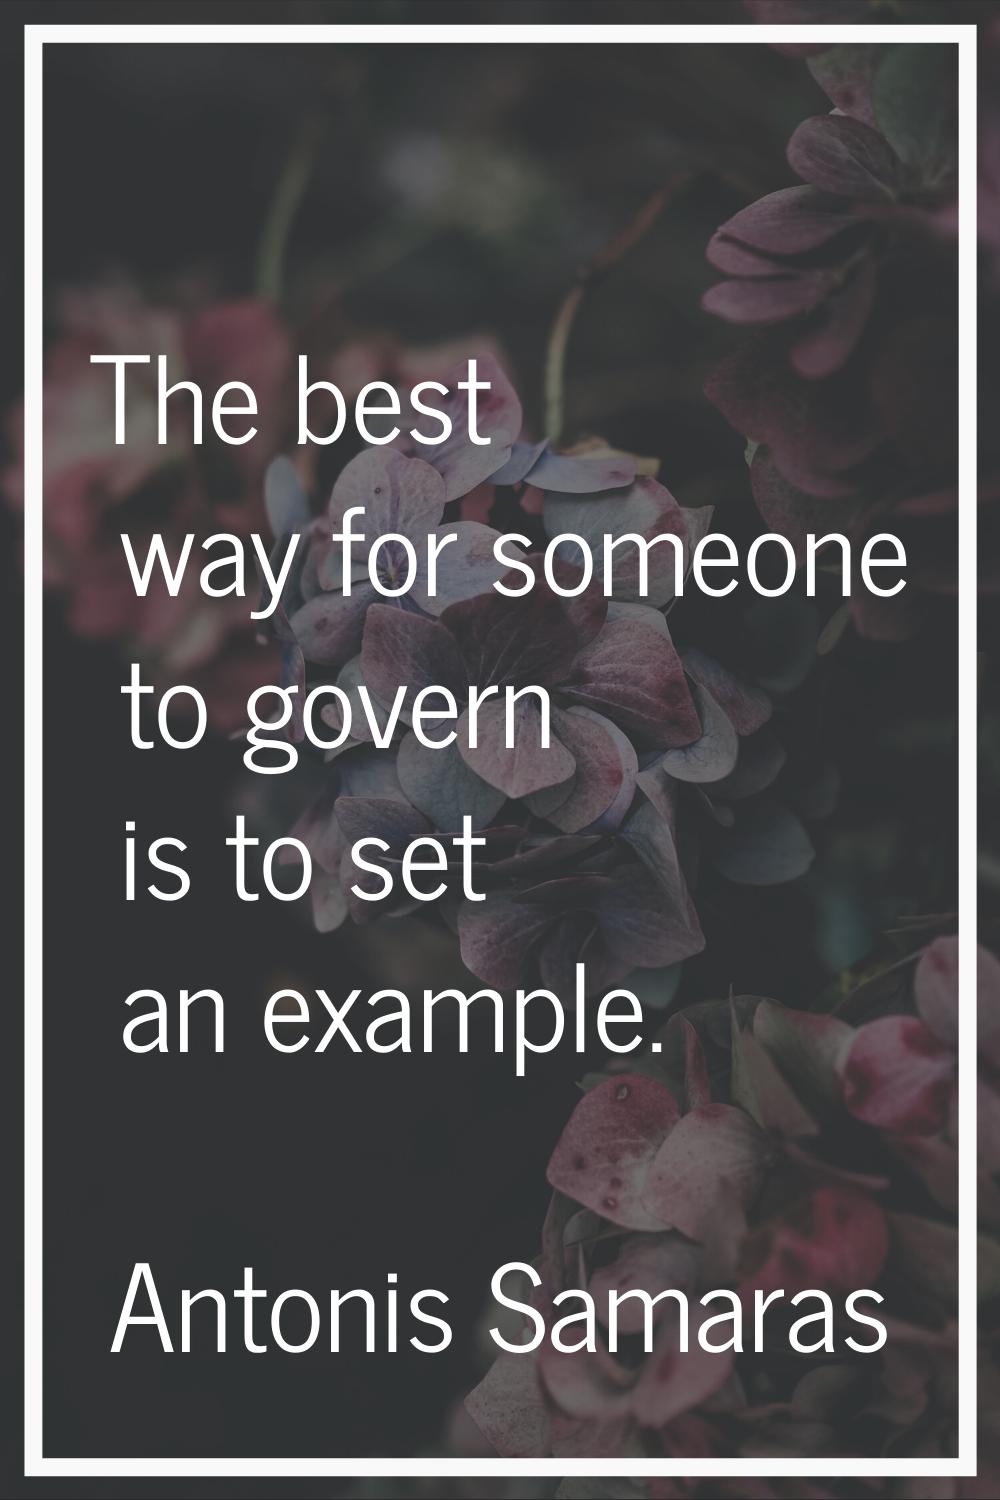 The best way for someone to govern is to set an example.